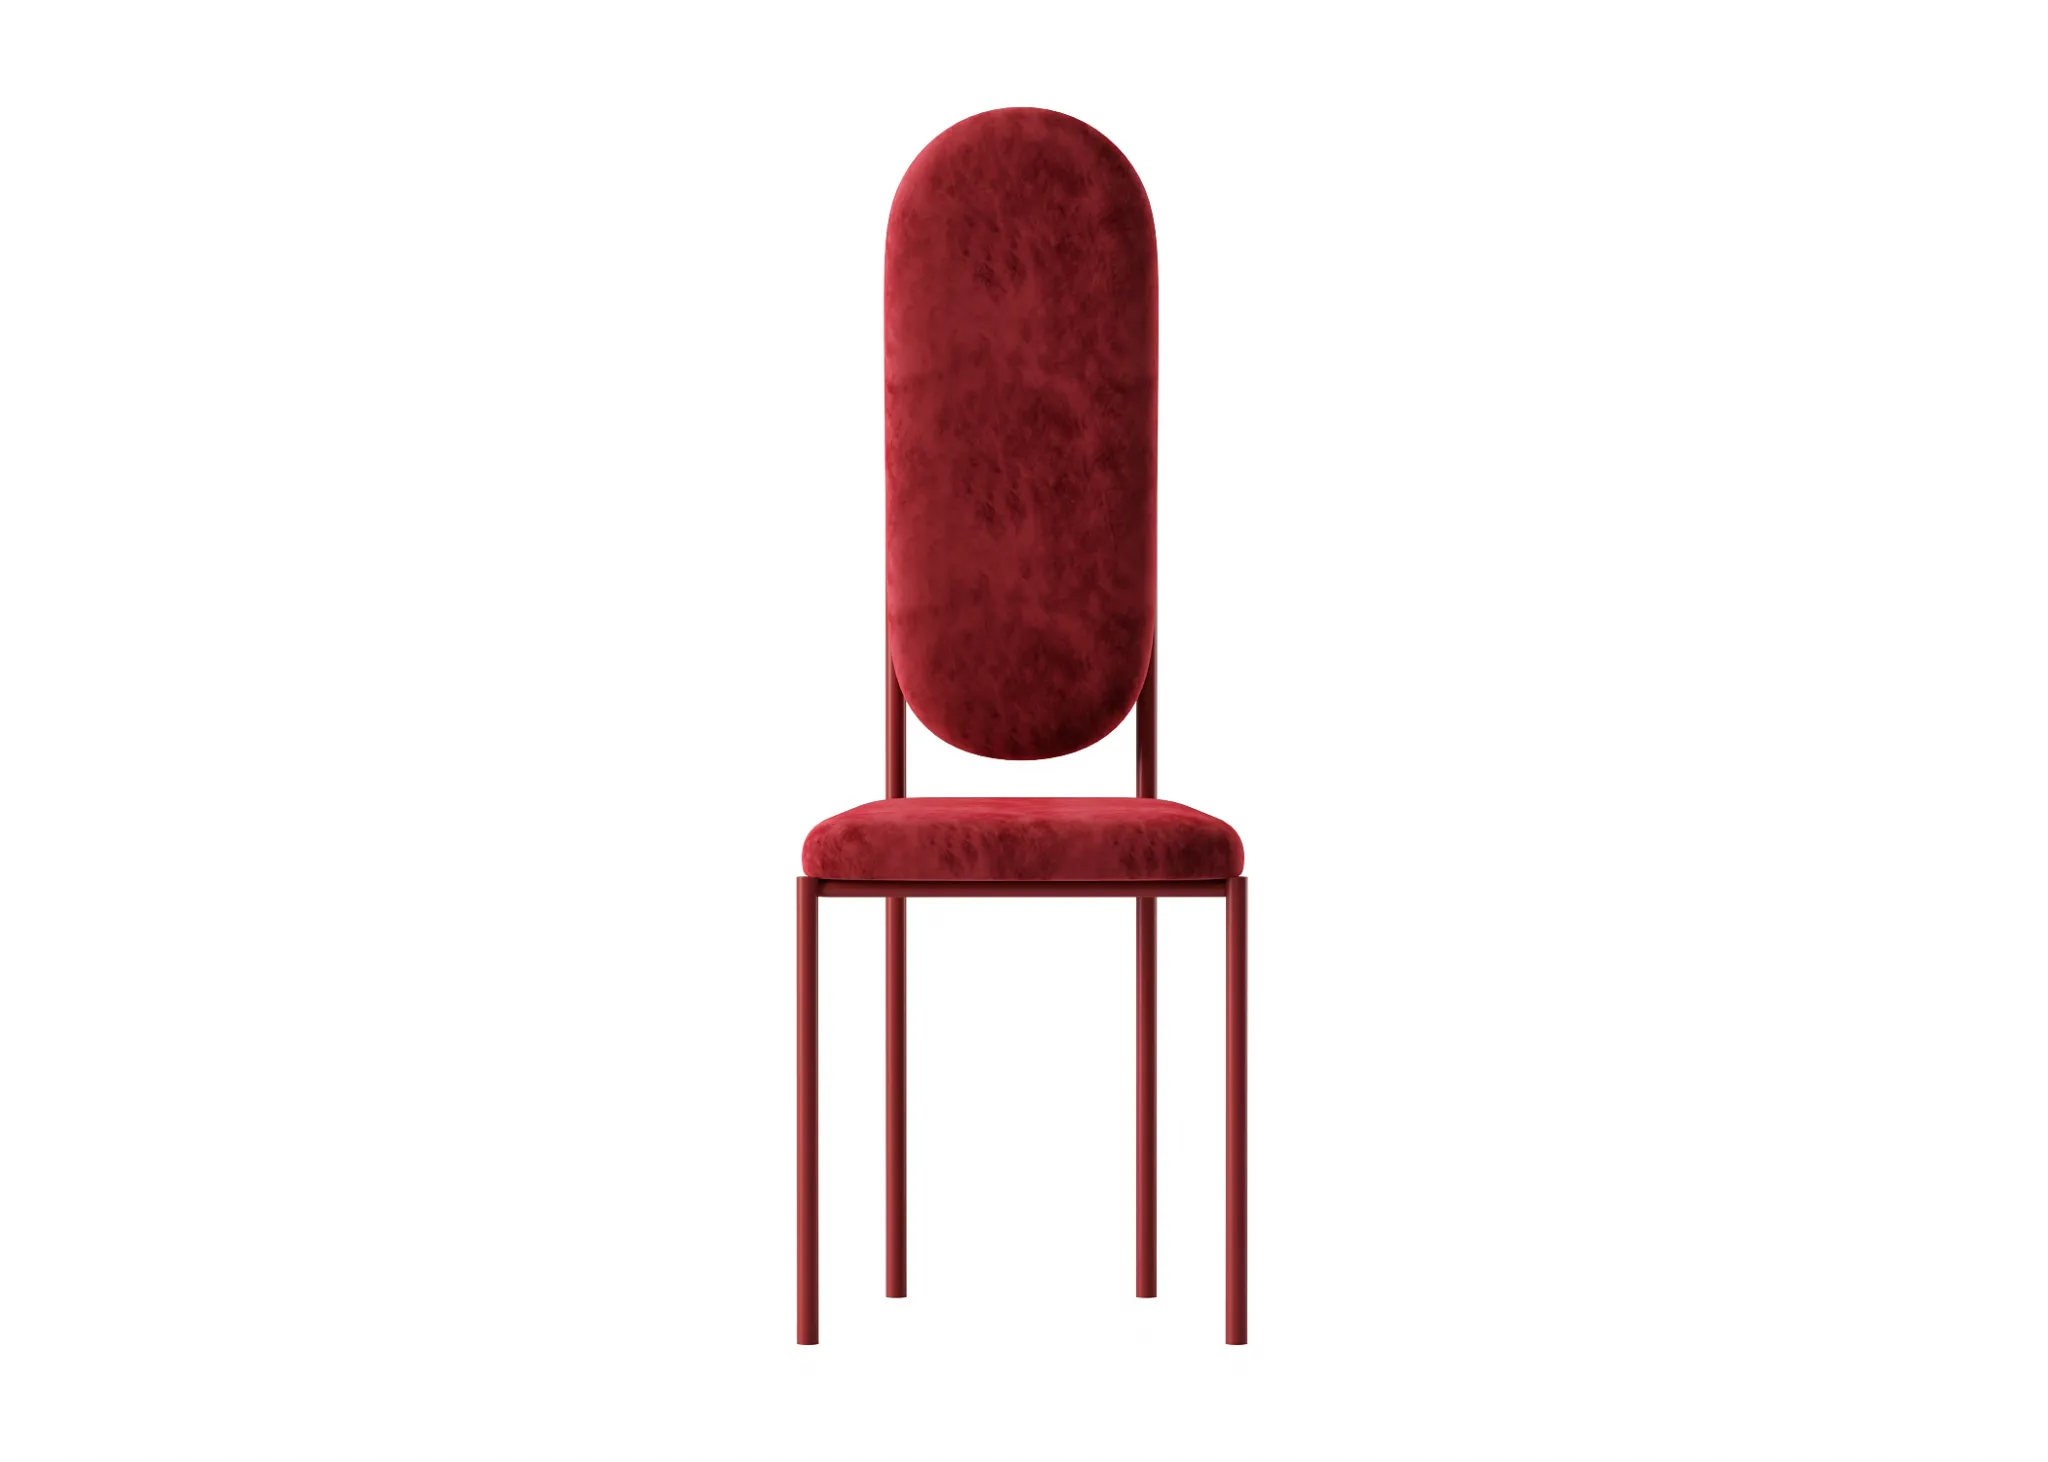 FURNITURE 3D MODELS – CHAIRS – 0029